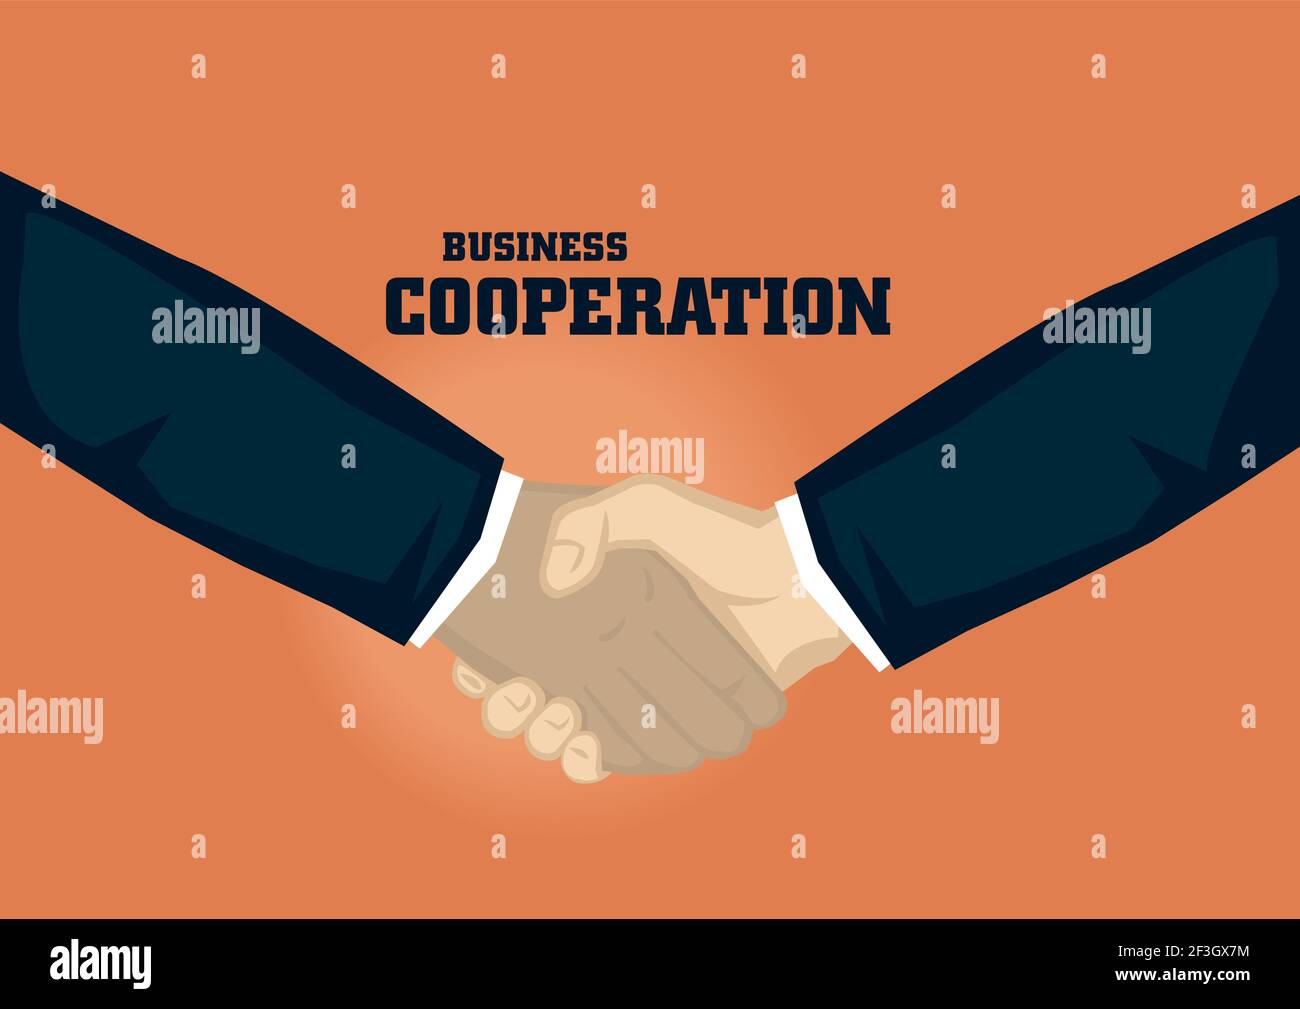 Handshake of different ethnicity. Vector cartoon for business illustration on business cooperation concept isolated on orange background. Stock Vector